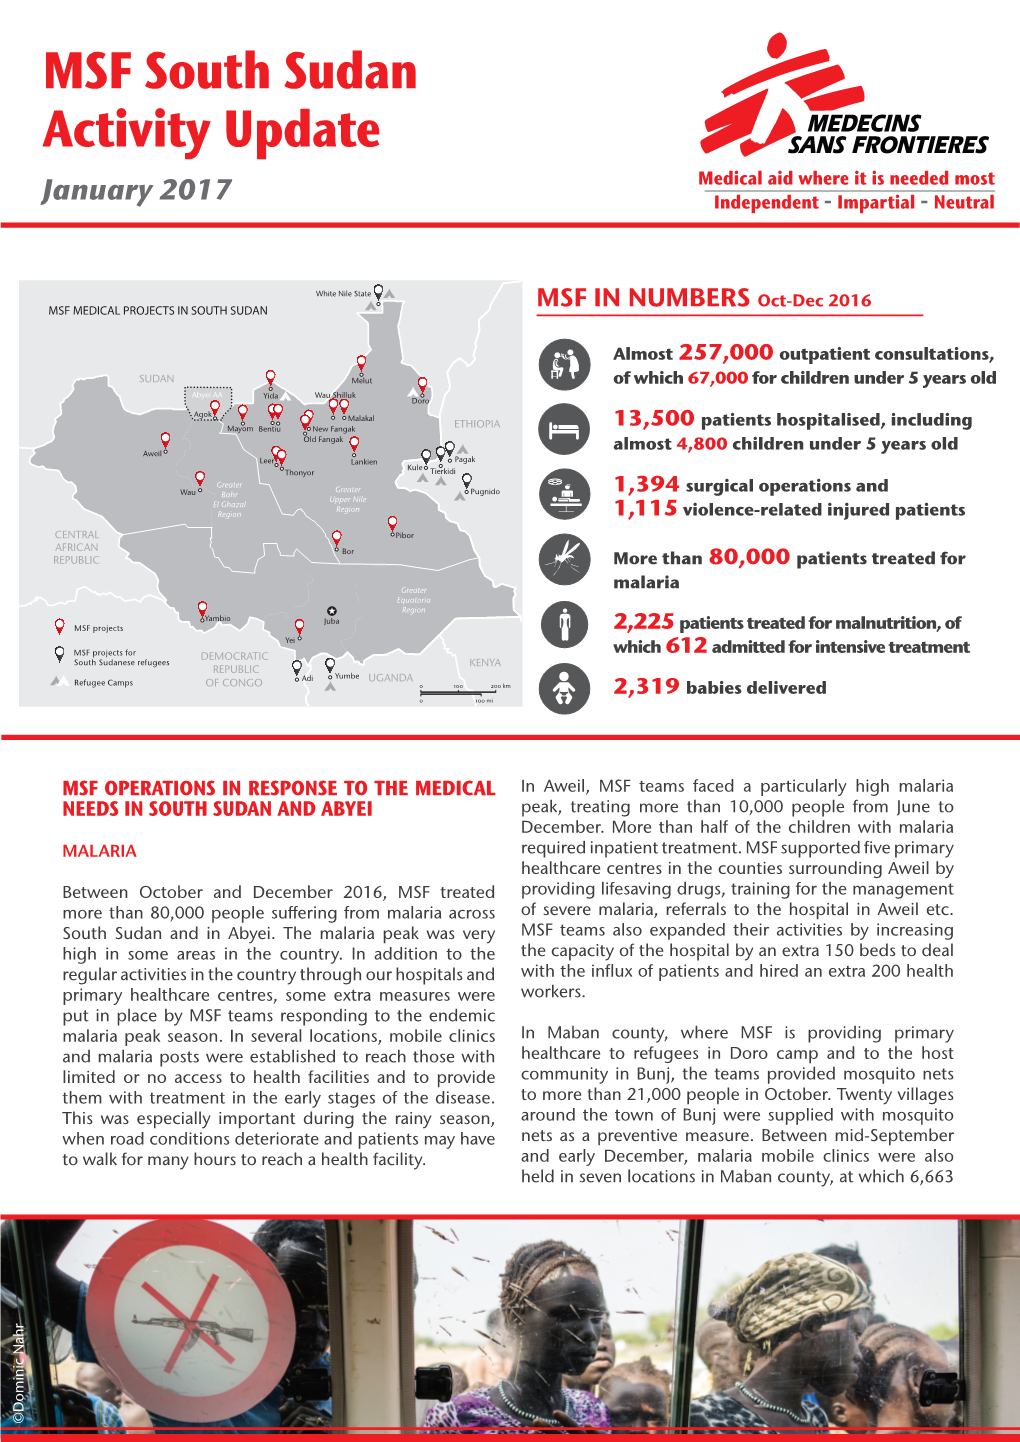 MSF South Sudan Activity Update Medical Aid Where It Is Needed Most January 2017 Independent - Impartial - Neutral